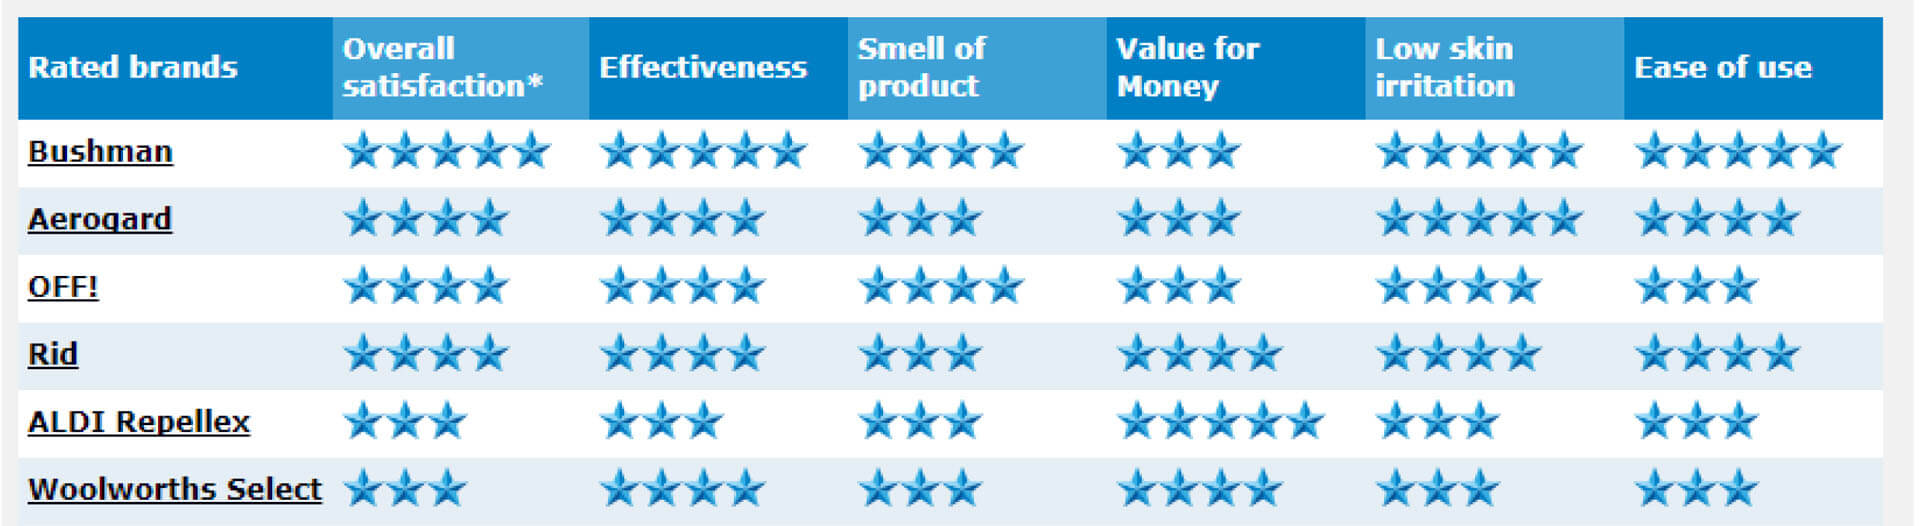 Canstar table comparing other repellent brands. Bushman ranks highest scoring 5 stars on 4 out of 6 catagories